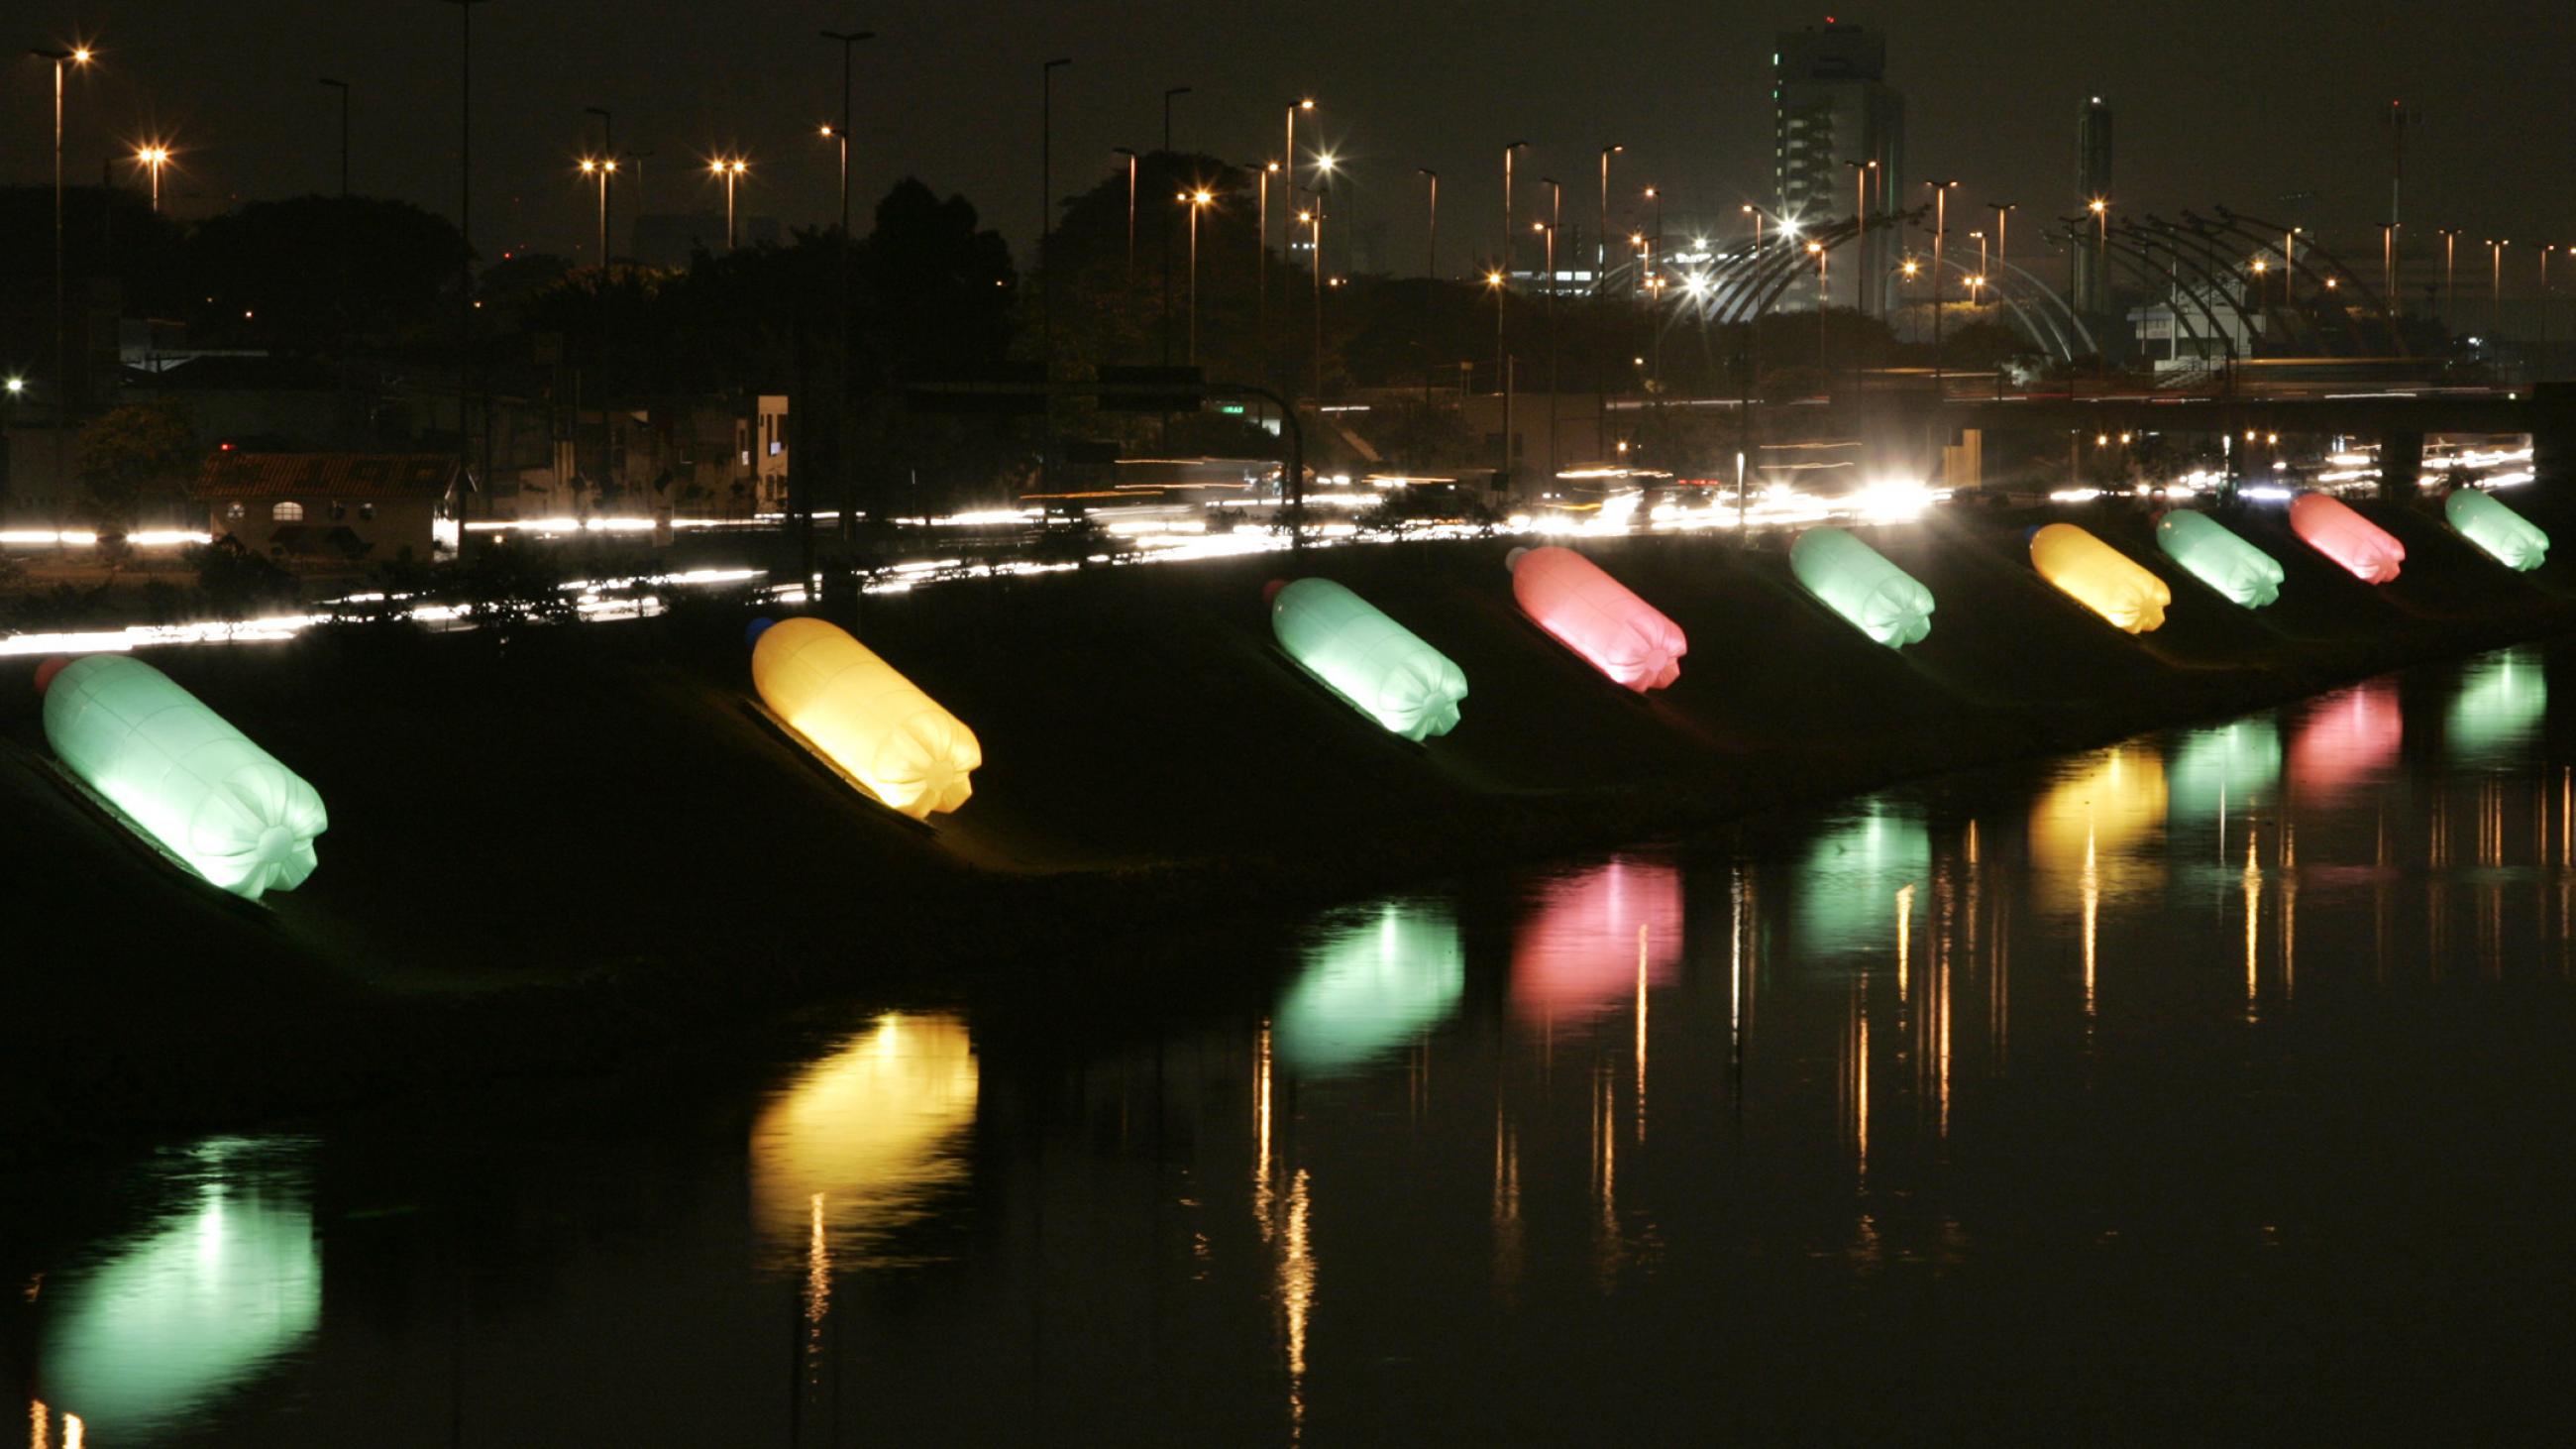 plastic bottles, illuminated by colorful lights, are photographed along the tiete river in brazil at night